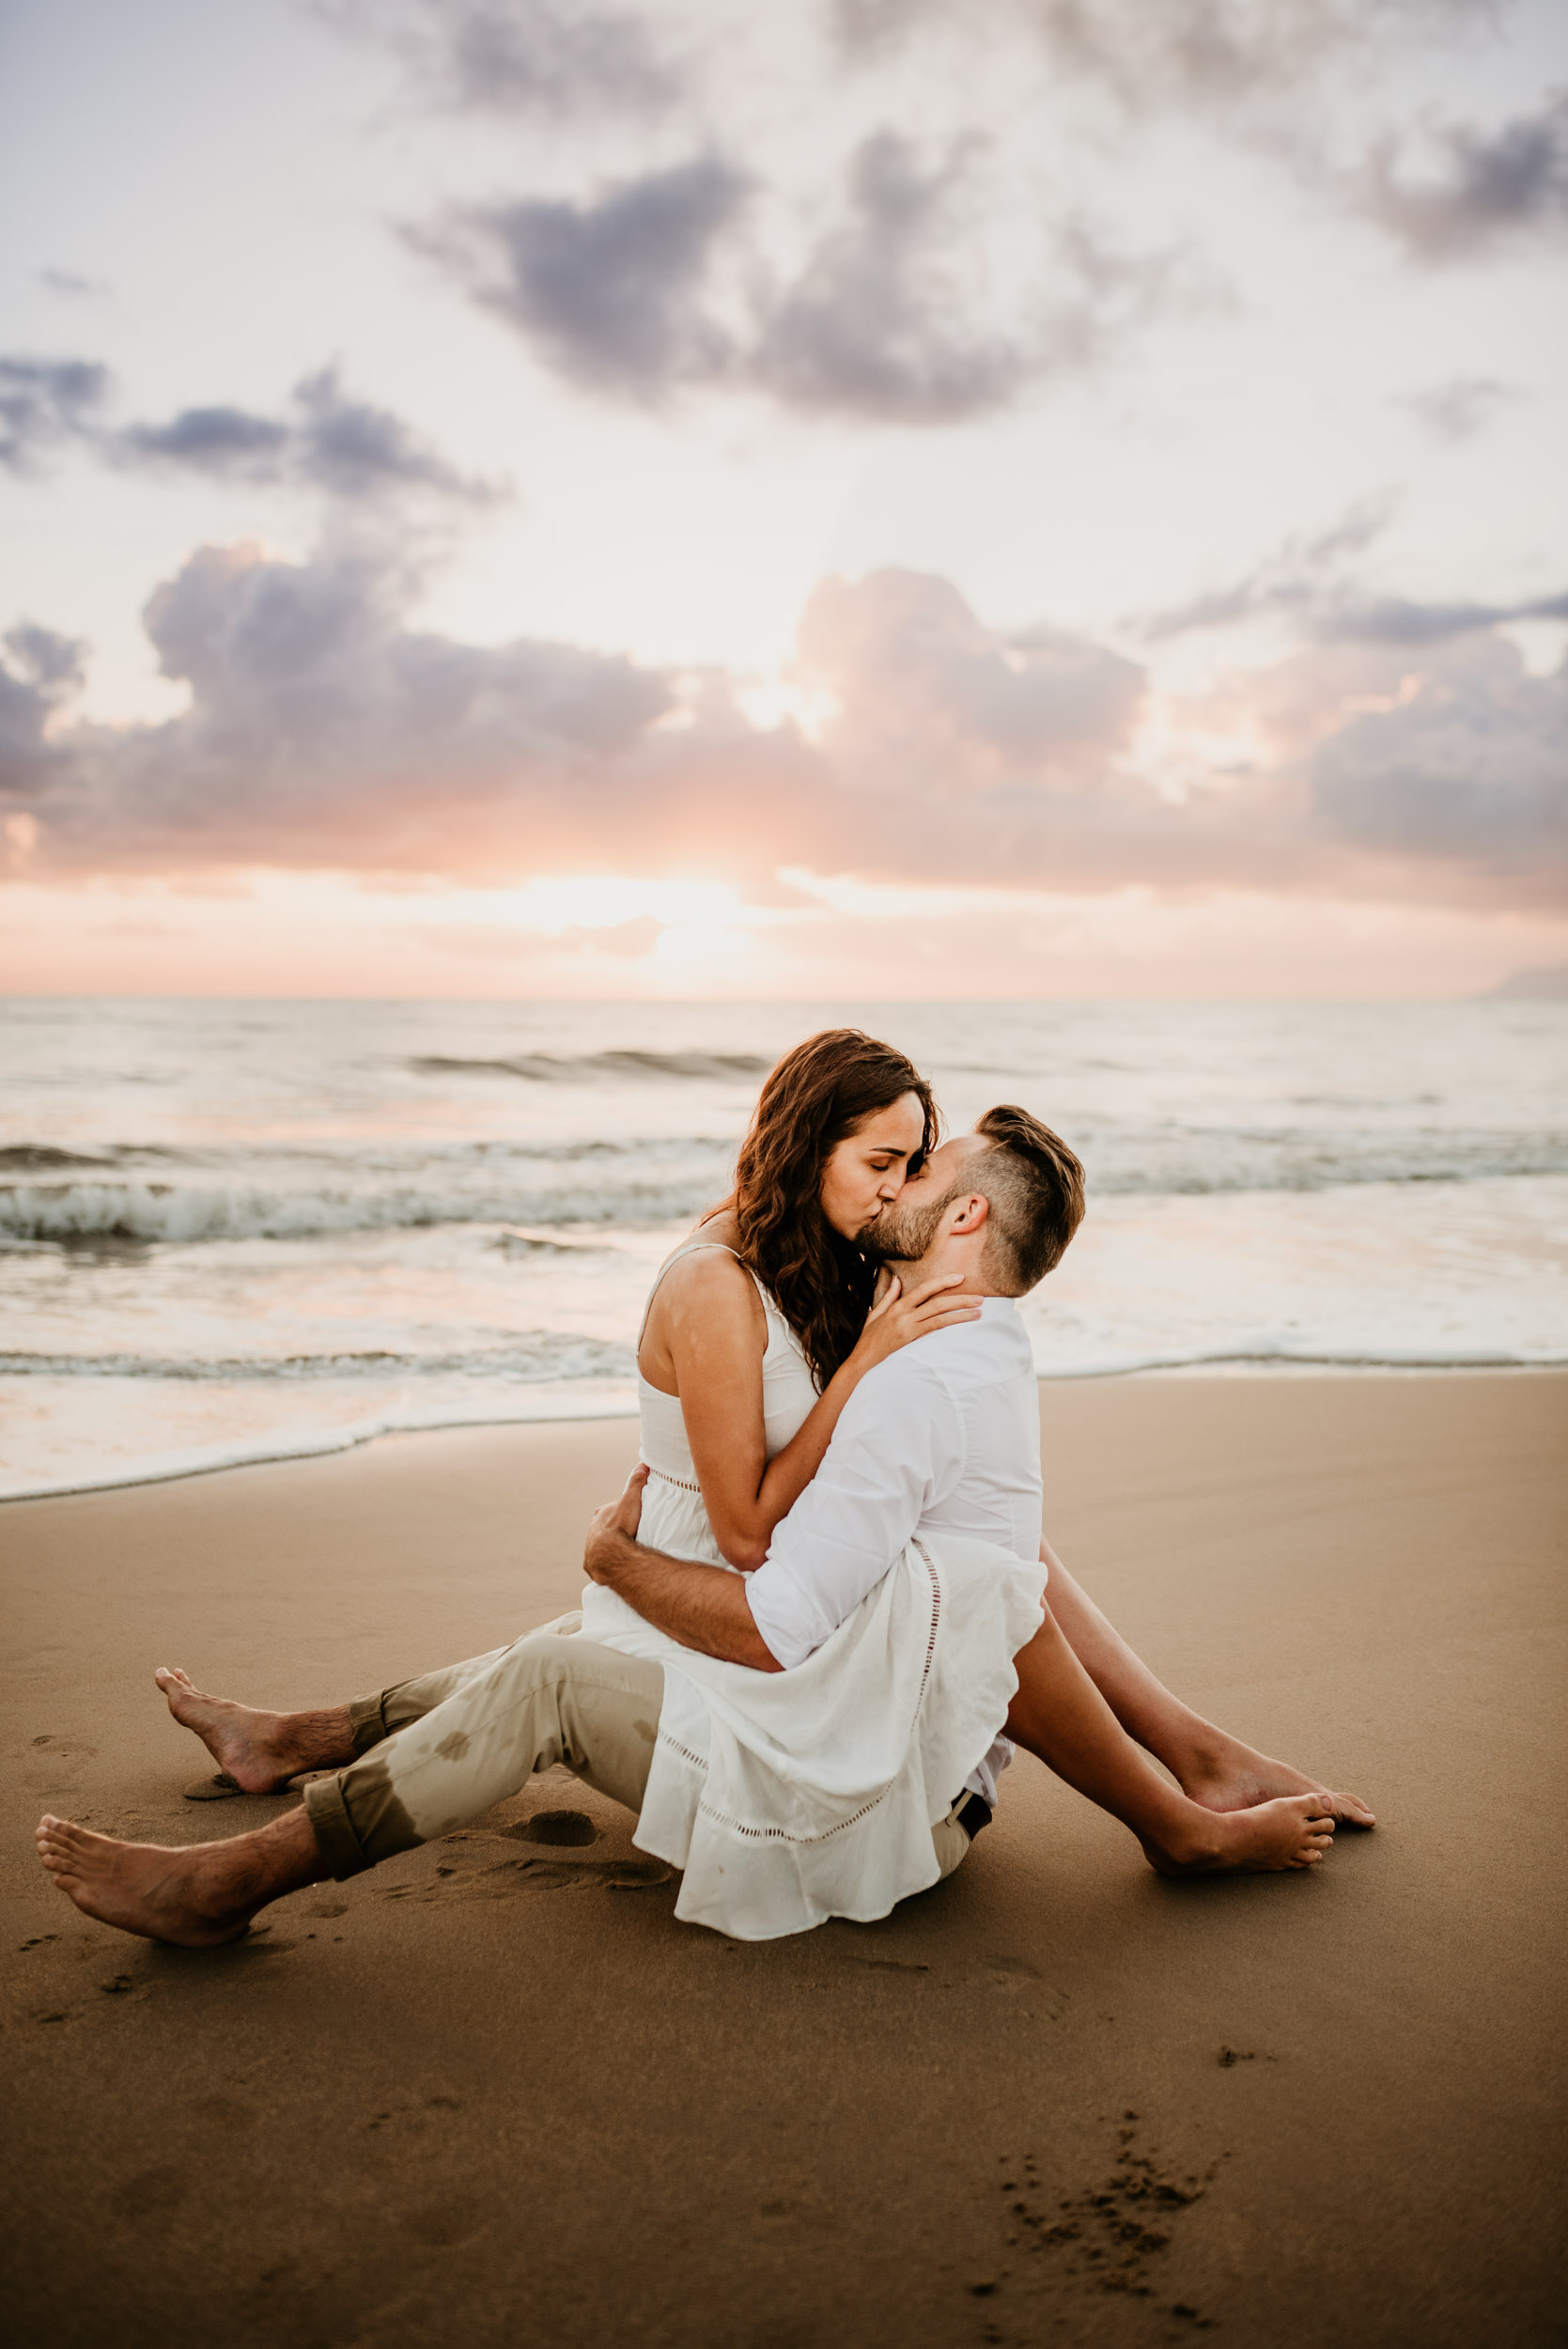 The Raw Photographer - Cairns Wedding Photographer - Engaged Engagement - Beach location - Candid Photography Queensland-14.jpg